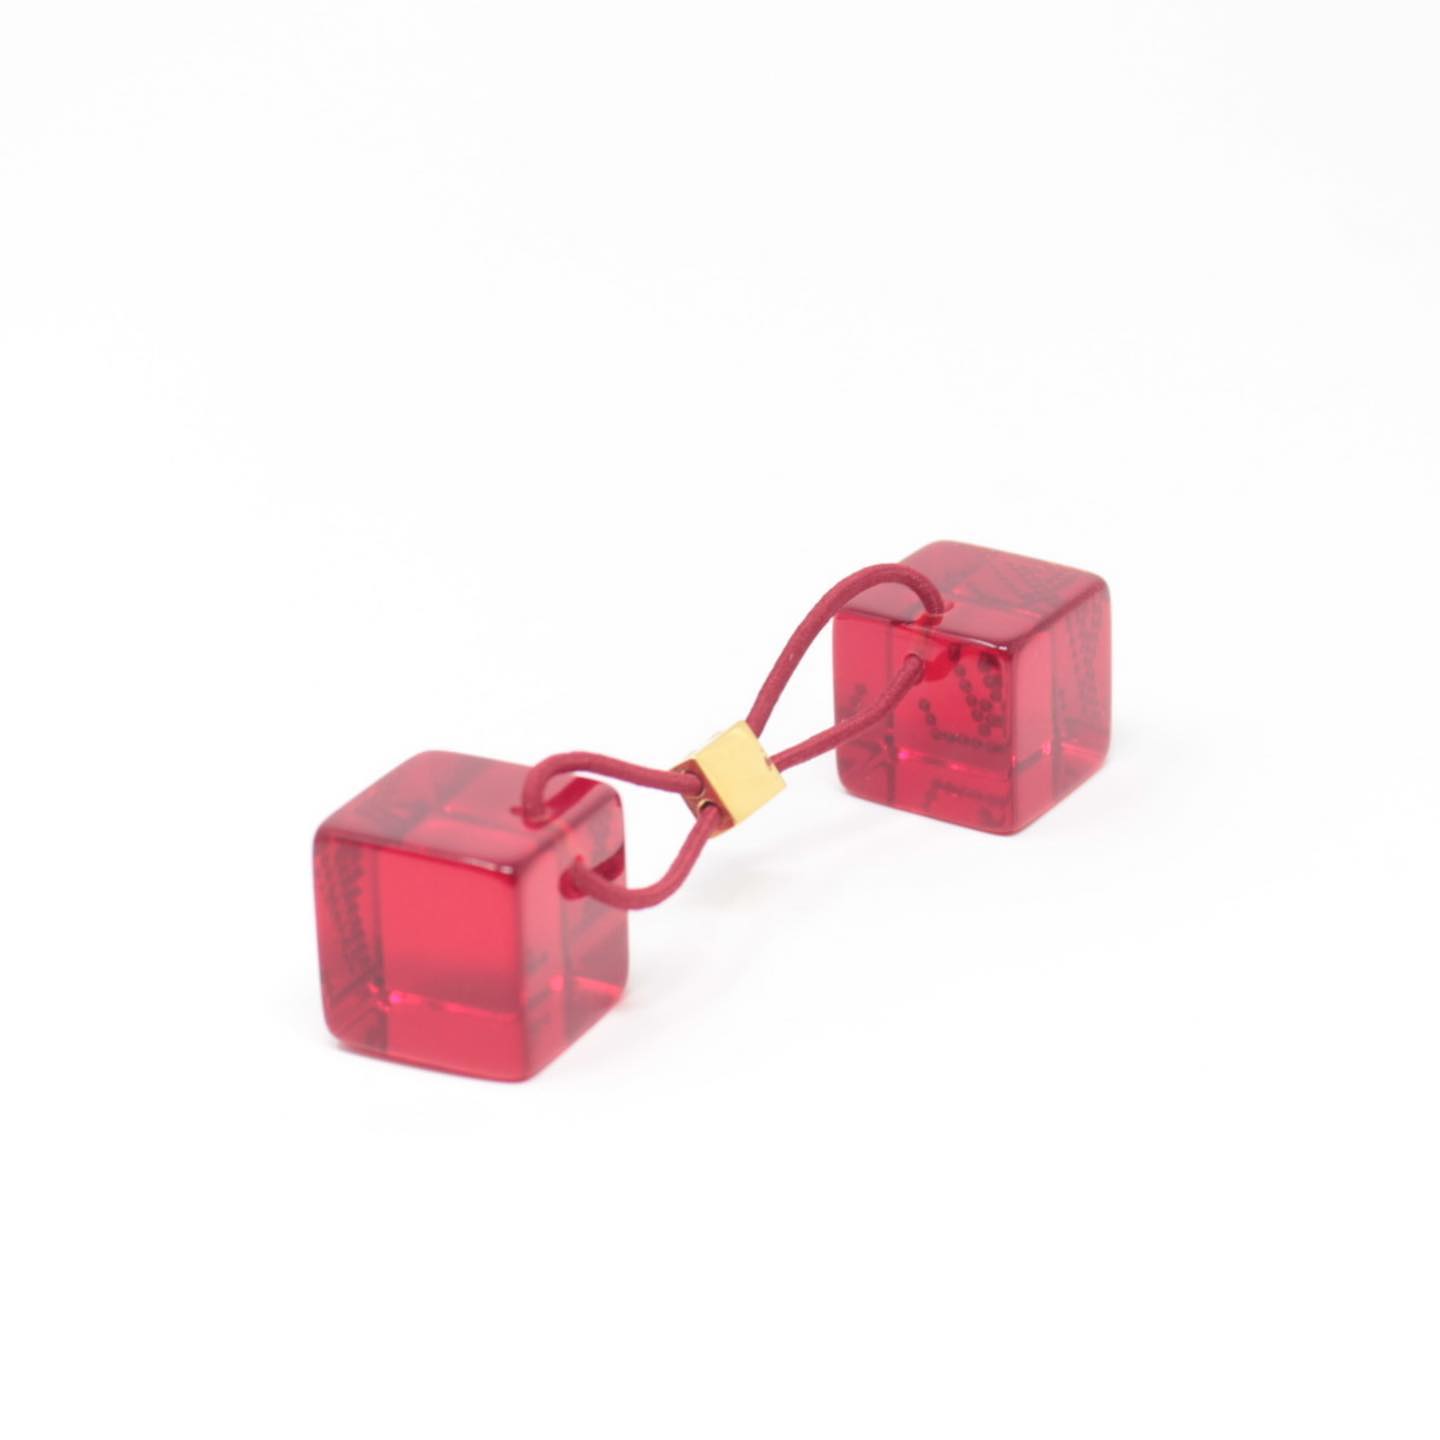 ON SALE* LOUIS VUITTON Red Cube Hair Tie Accessory #25681 – ALL